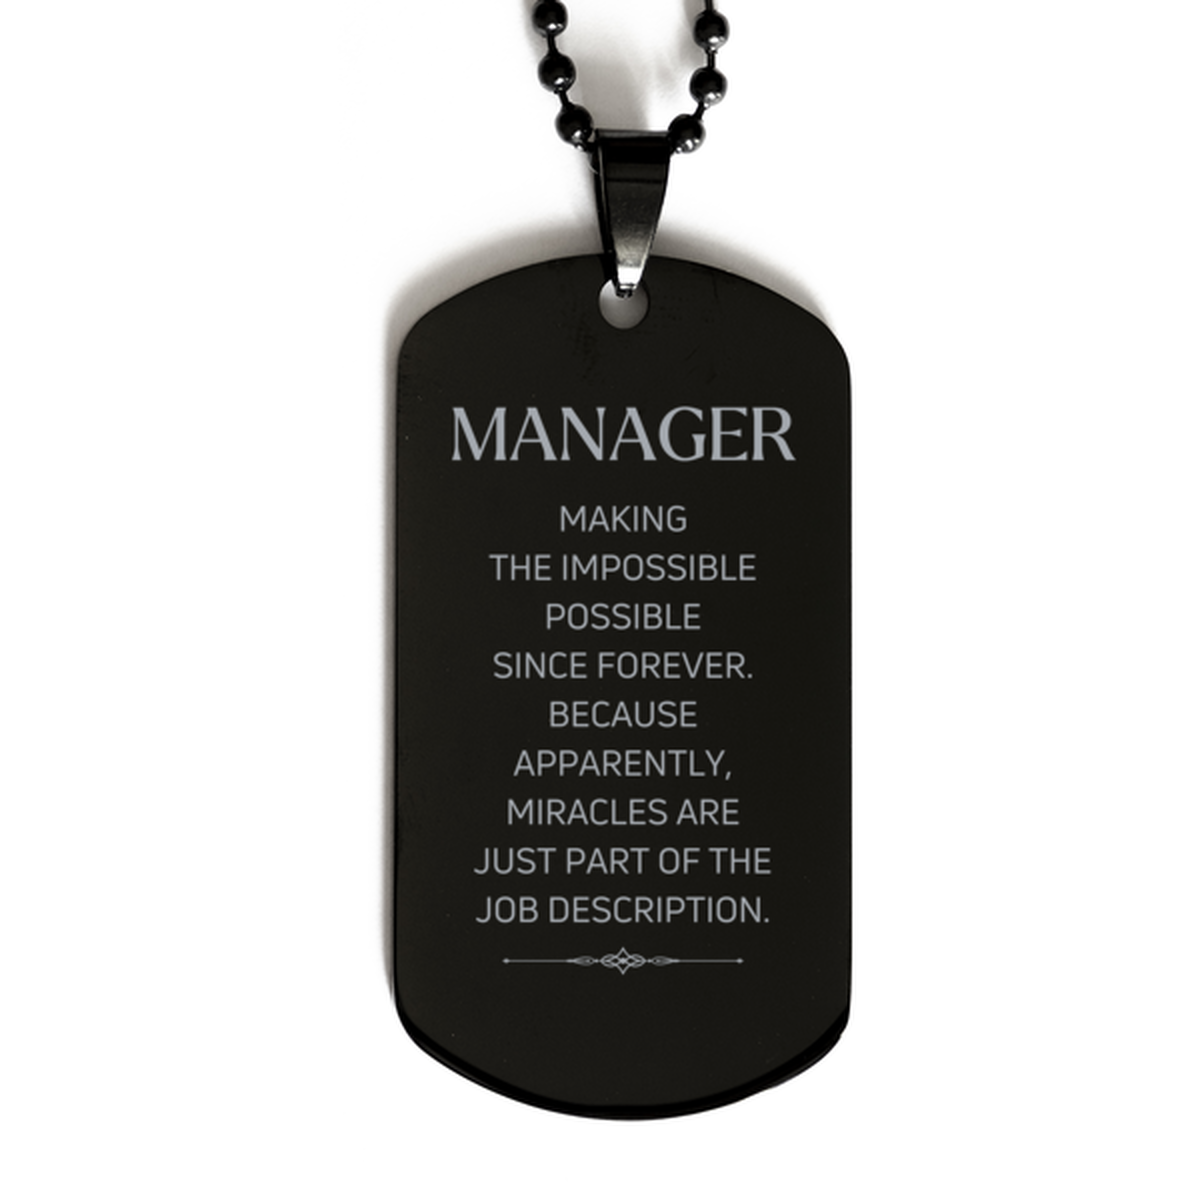 Funny Manager Gifts, Miracles are just part of the job description, Inspirational Birthday Black Dog Tag For Manager, Men, Women, Coworkers, Friends, Boss